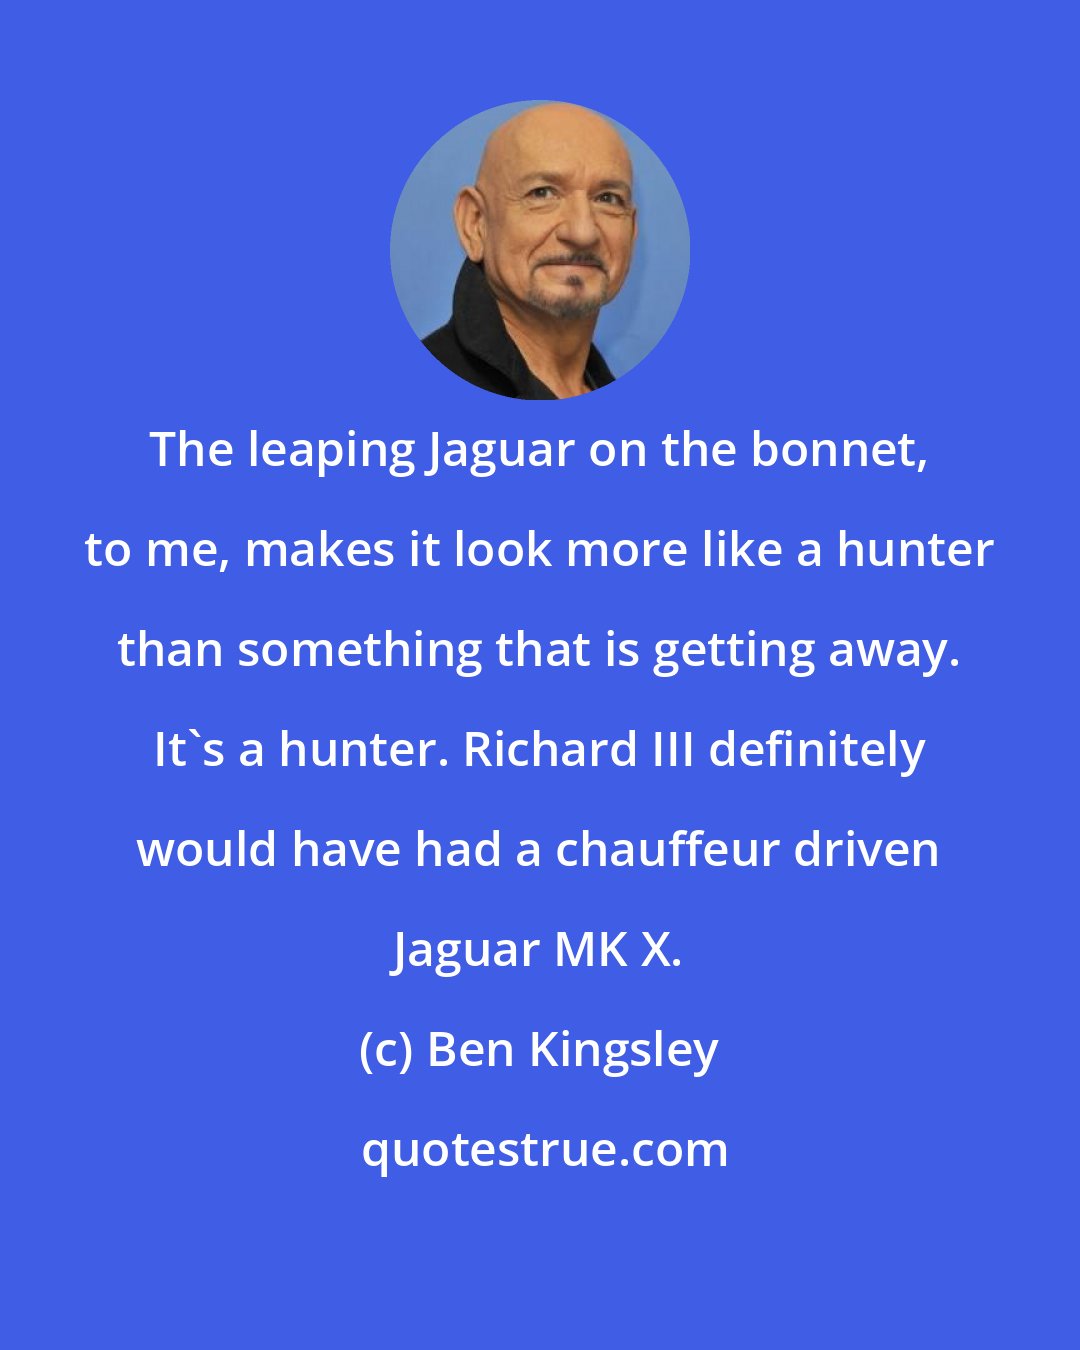 Ben Kingsley: The leaping Jaguar on the bonnet, to me, makes it look more like a hunter than something that is getting away. It's a hunter. Richard III definitely would have had a chauffeur driven Jaguar MK X.